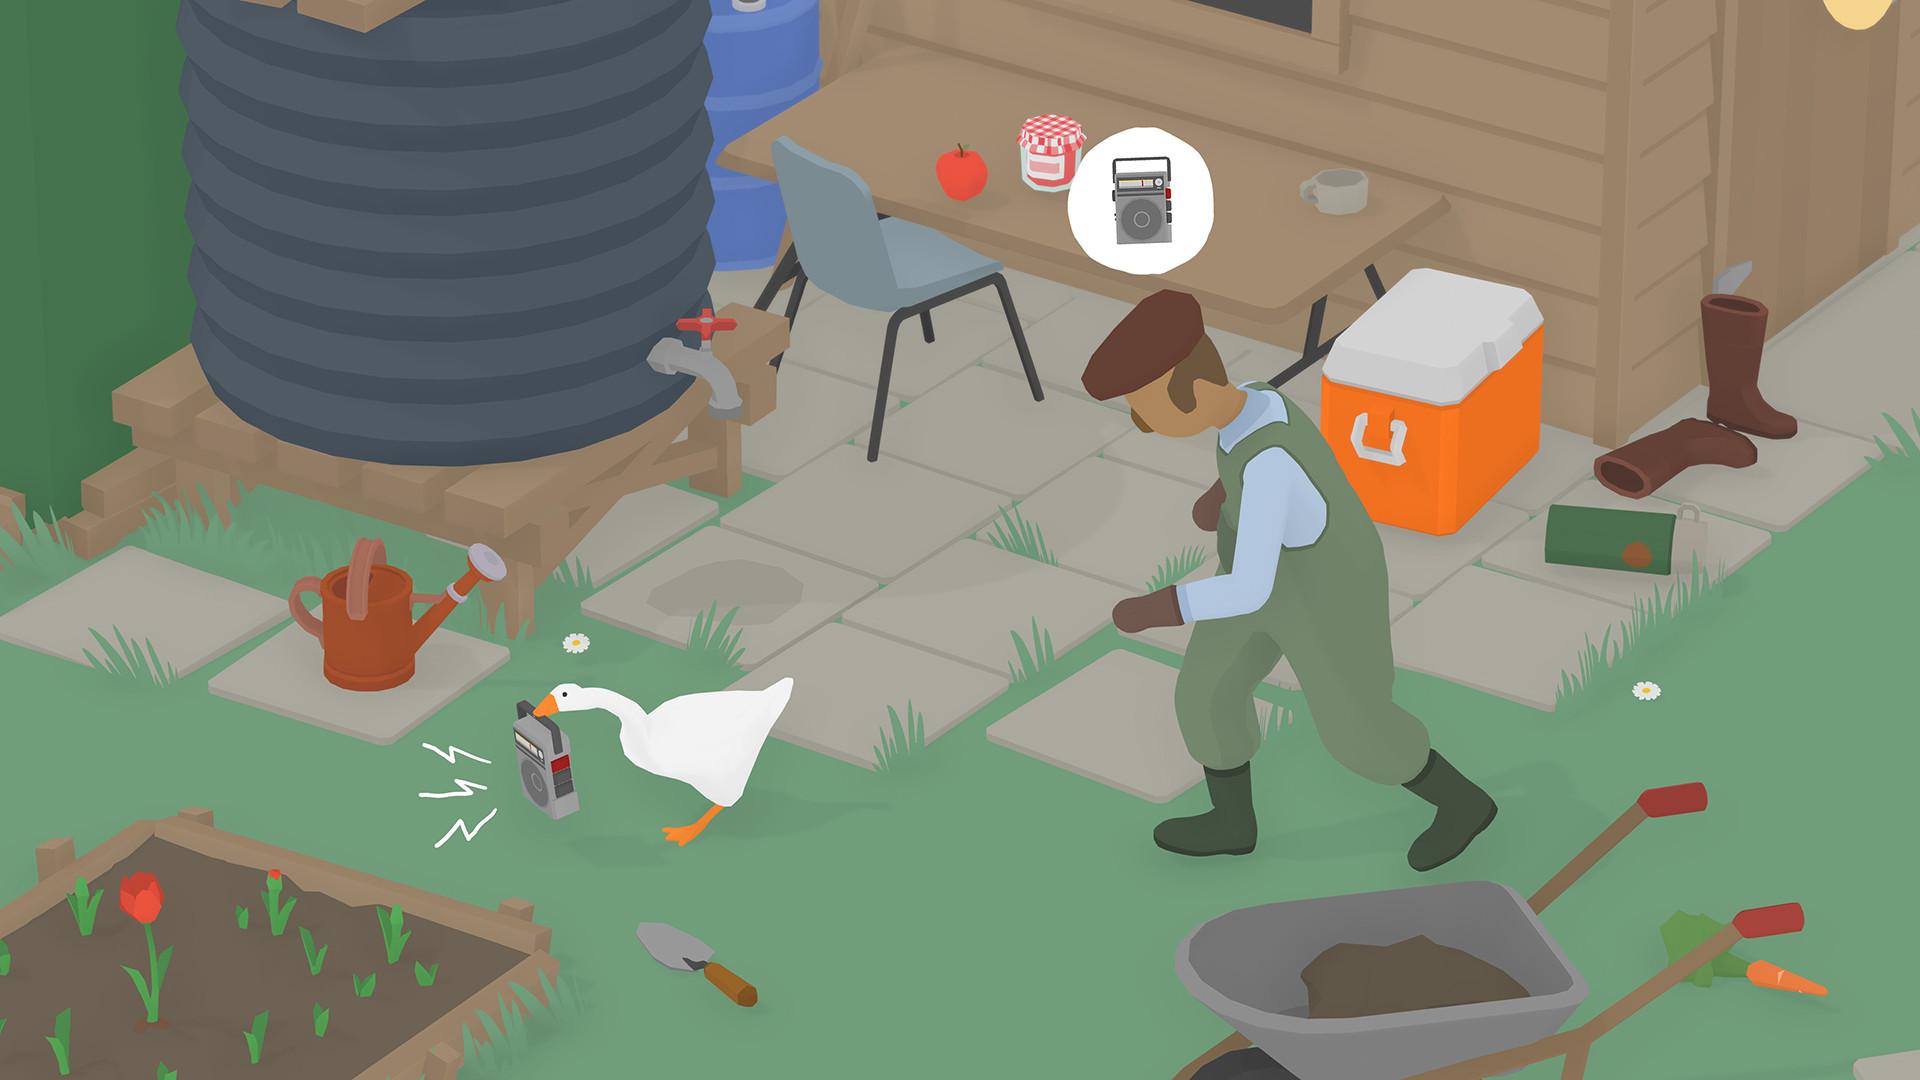 Untitled Goose Game at 25% off